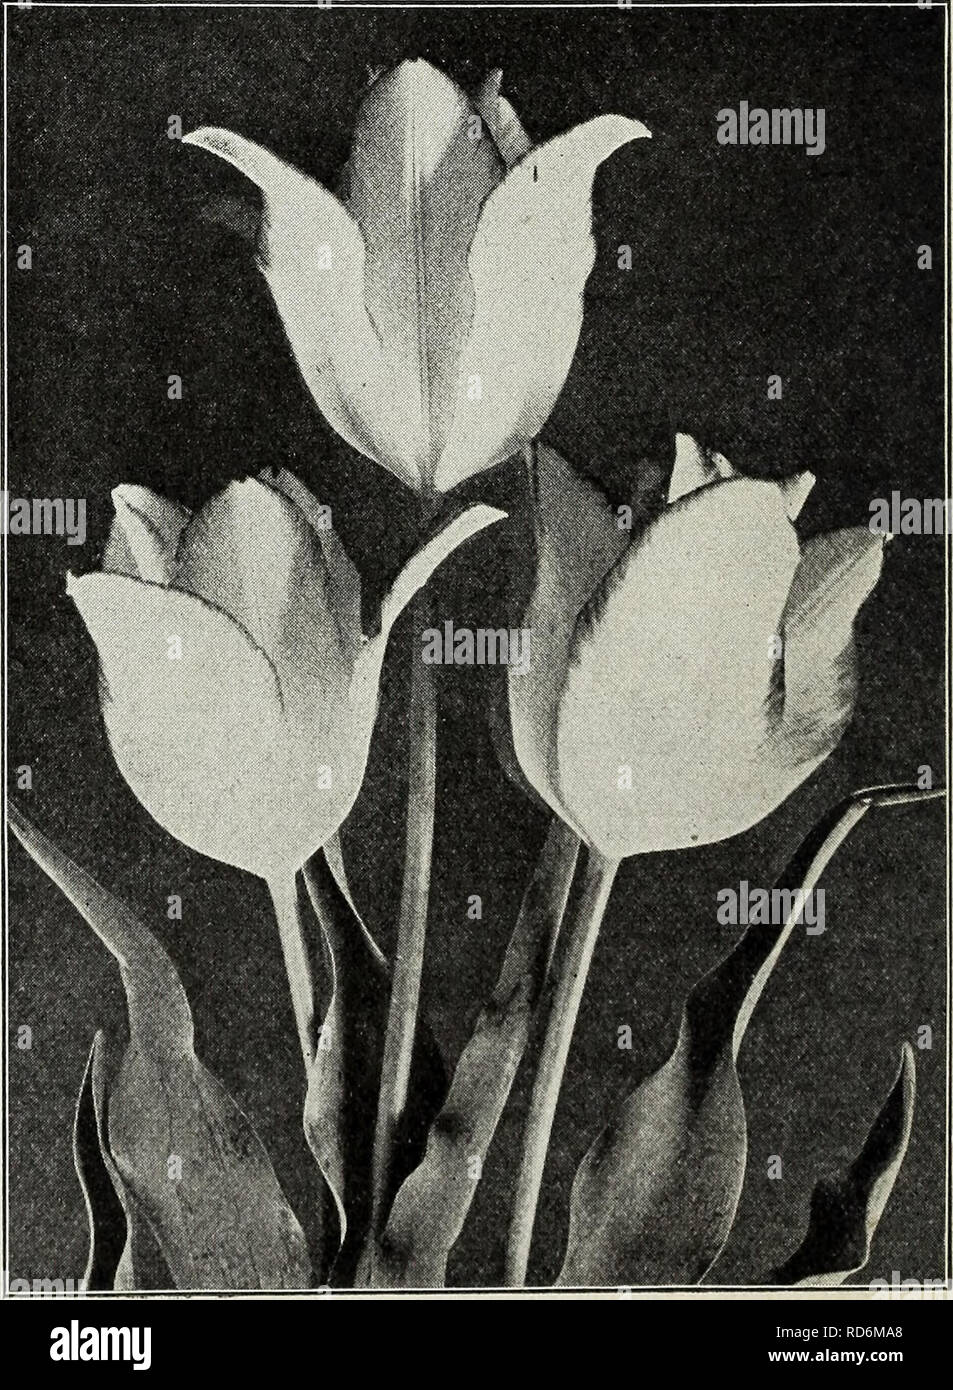 . Currie's autumn 1929 54th year bulbs and plants. Flowers Seeds Catalogs; Bulbs (Plants) Seeds Catalogs; Nurseries (Horticulture) Catalogs; Plants, Ornamental Catalogs. La Merveille—(18 in.) A superb Tulip of great size, color orange scarlet, flushed rose with yellow center, deliciously fragrant. Doz., 70c; 100, ^4.50; 1000, ^40.00. Maiden's Blush (Picotee)—(24 in.) Pure white with rosy-pink margins. Doz., 75c; 100, ^5.00; 1000, ^45.00. Marvel—(24 in.) Inside old gold, outside salmon rose yellow edges, sweet scented. Doz., ^1.35; 100, ^9.00; 1000 ^85.00, Mrs. Kerrell—Orange rose, center white Stock Photo